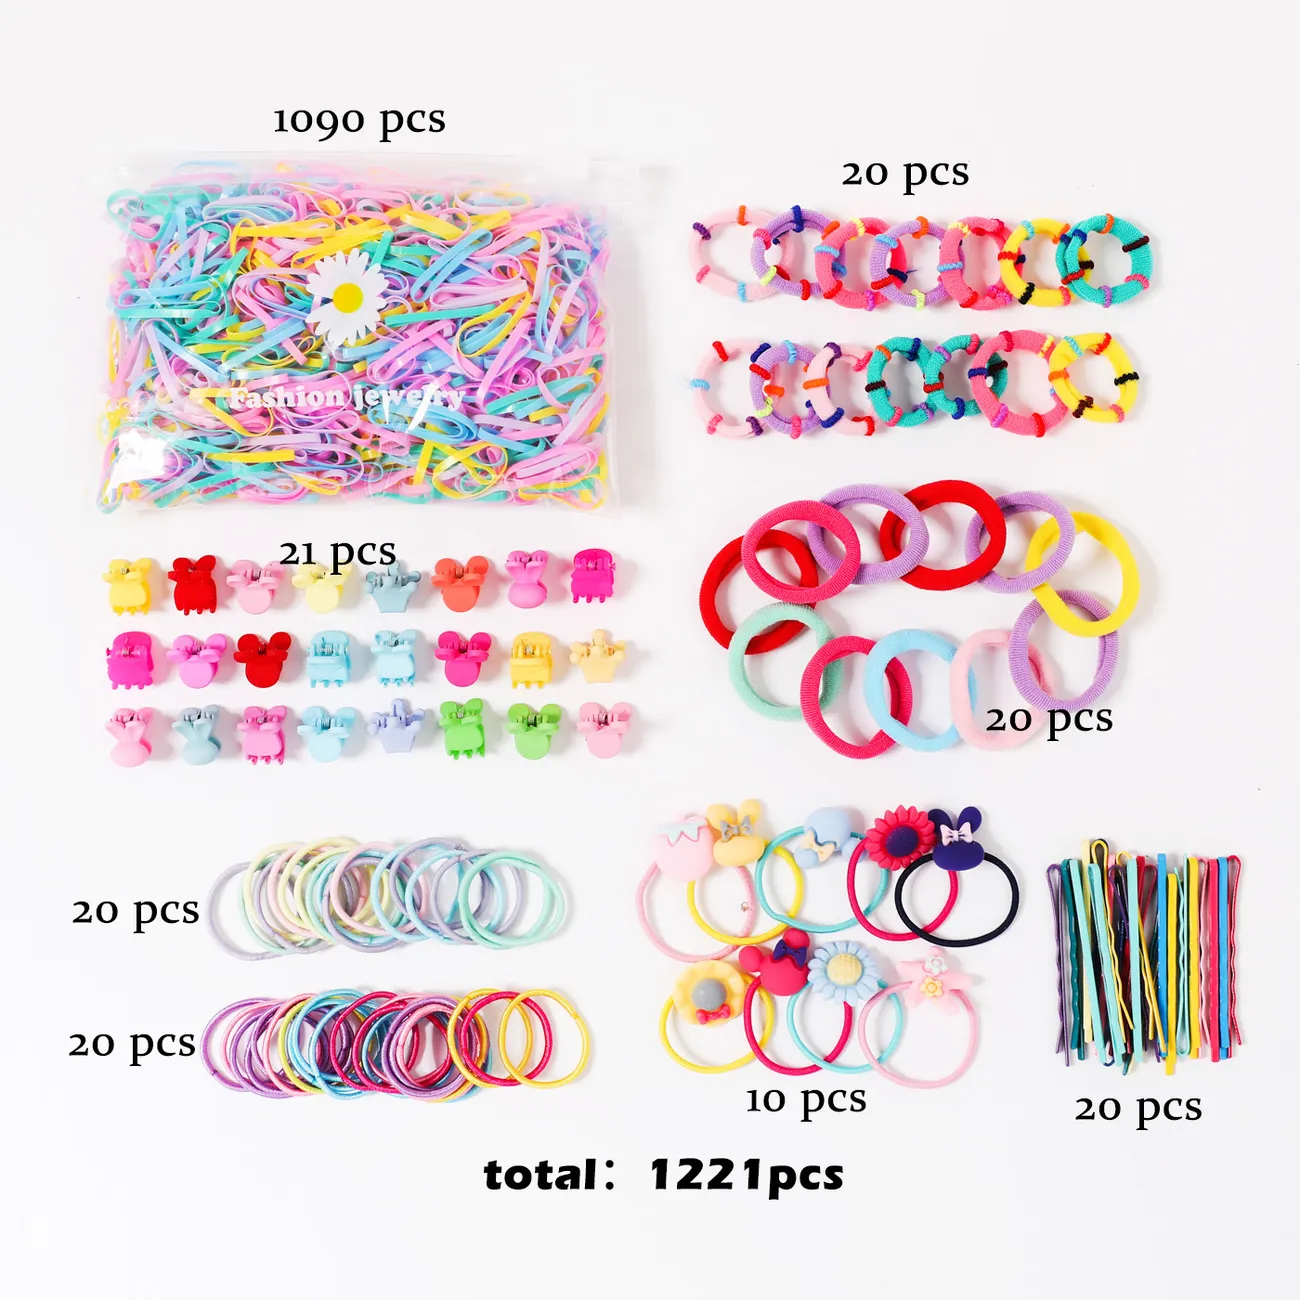 1221-pack Multicolor Hair Accessory Sets for Girls Color-A big image 1